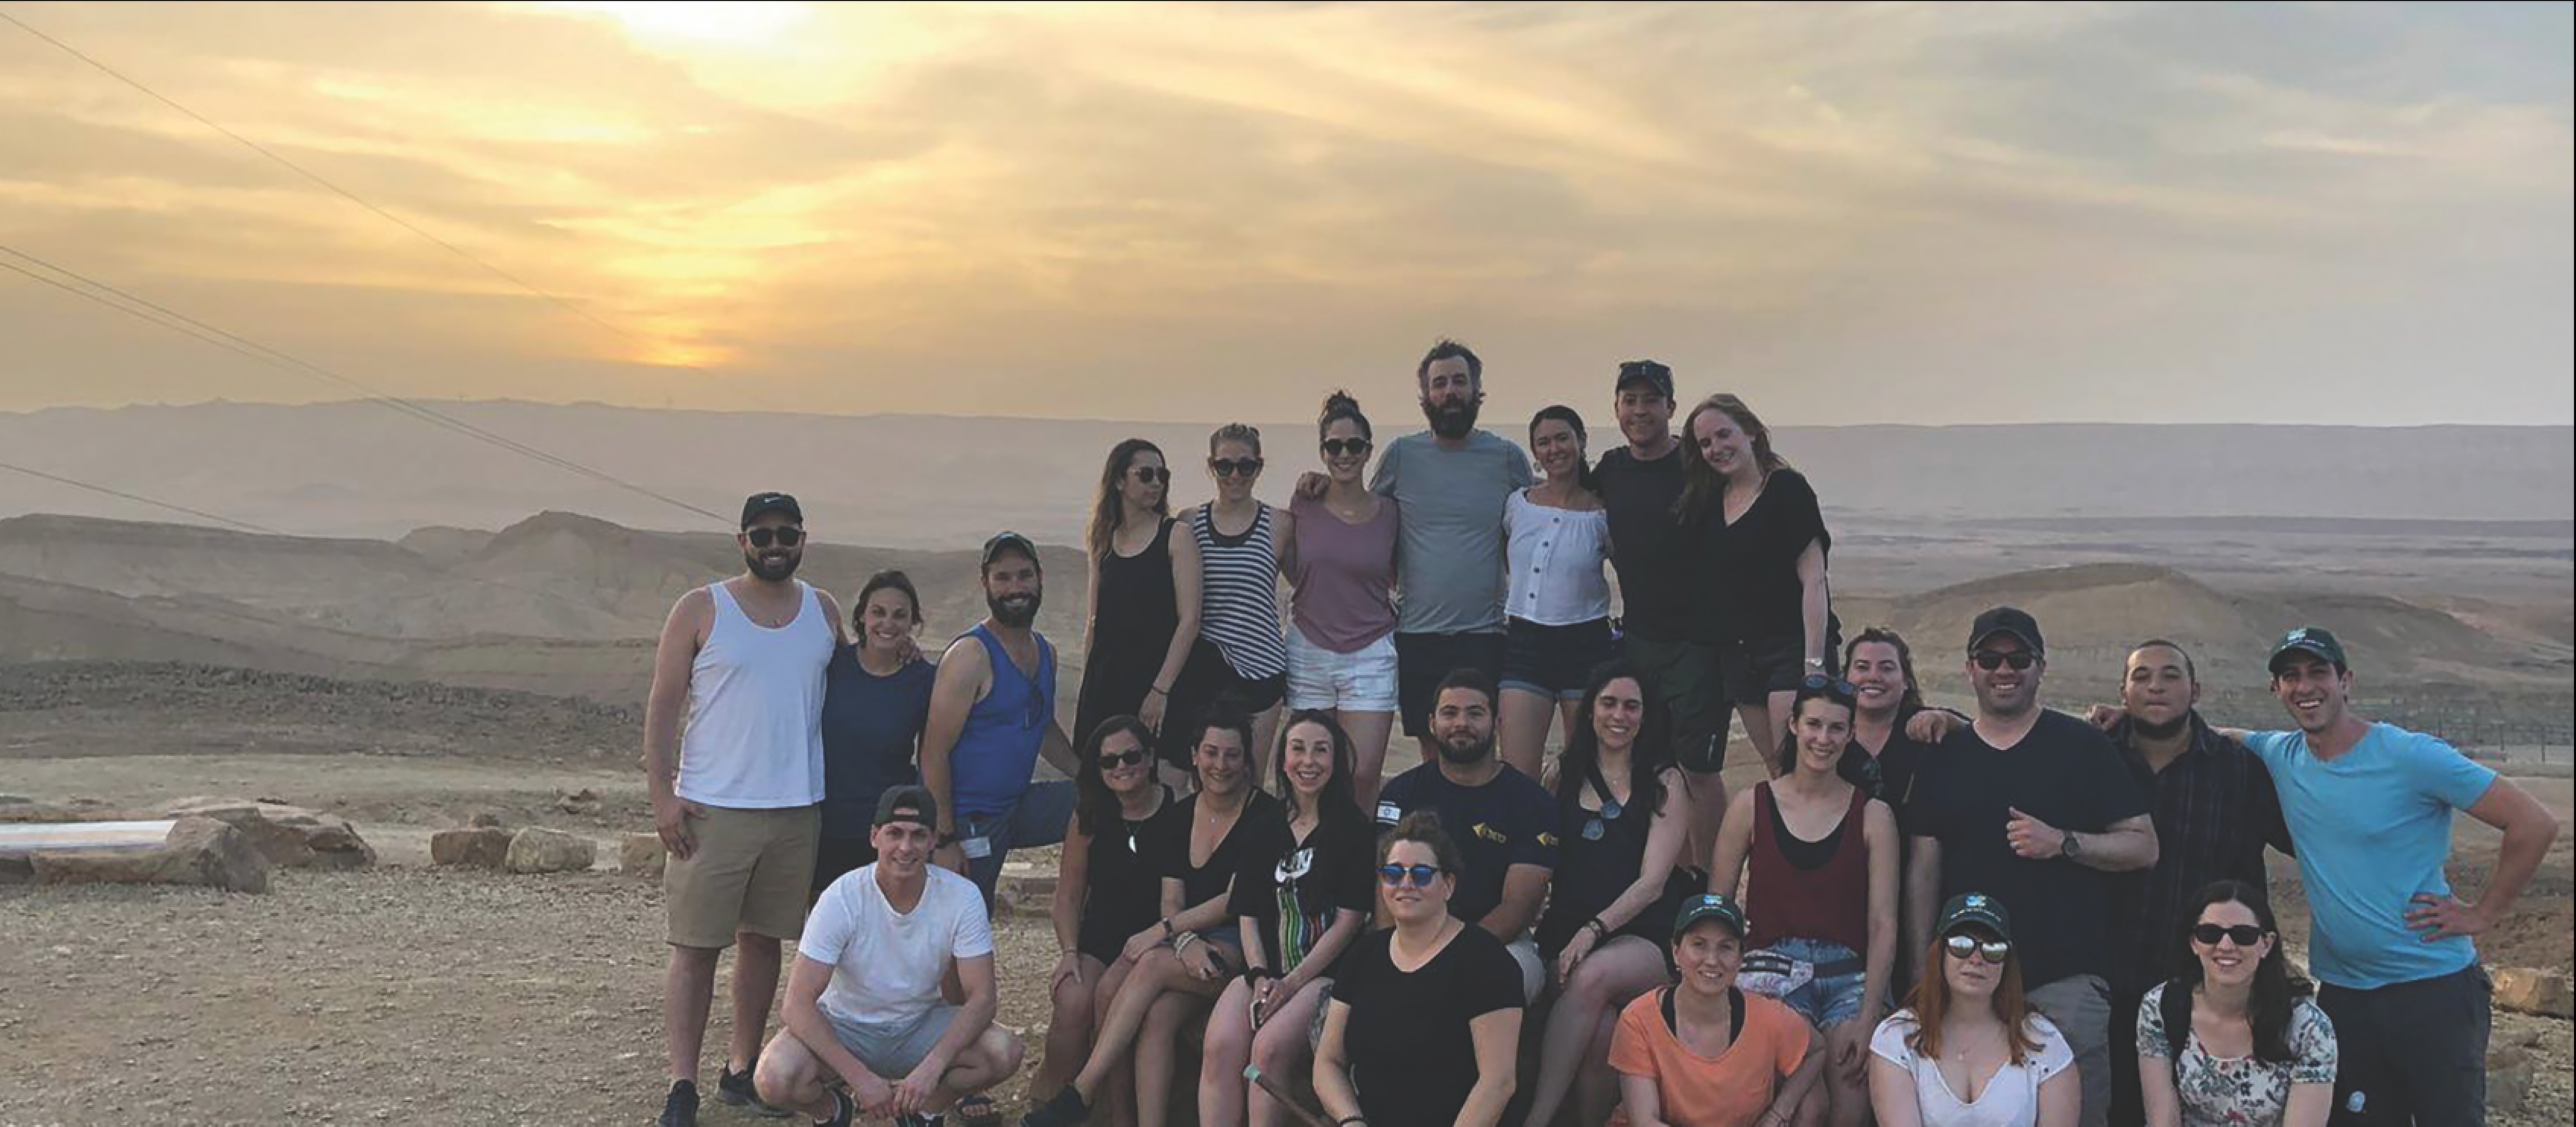 Jewish National Fund of Canada | The Jewish National Fund of Canada, together with support from our donors & volunteers across the country, is building the foundations for Israel's future. 